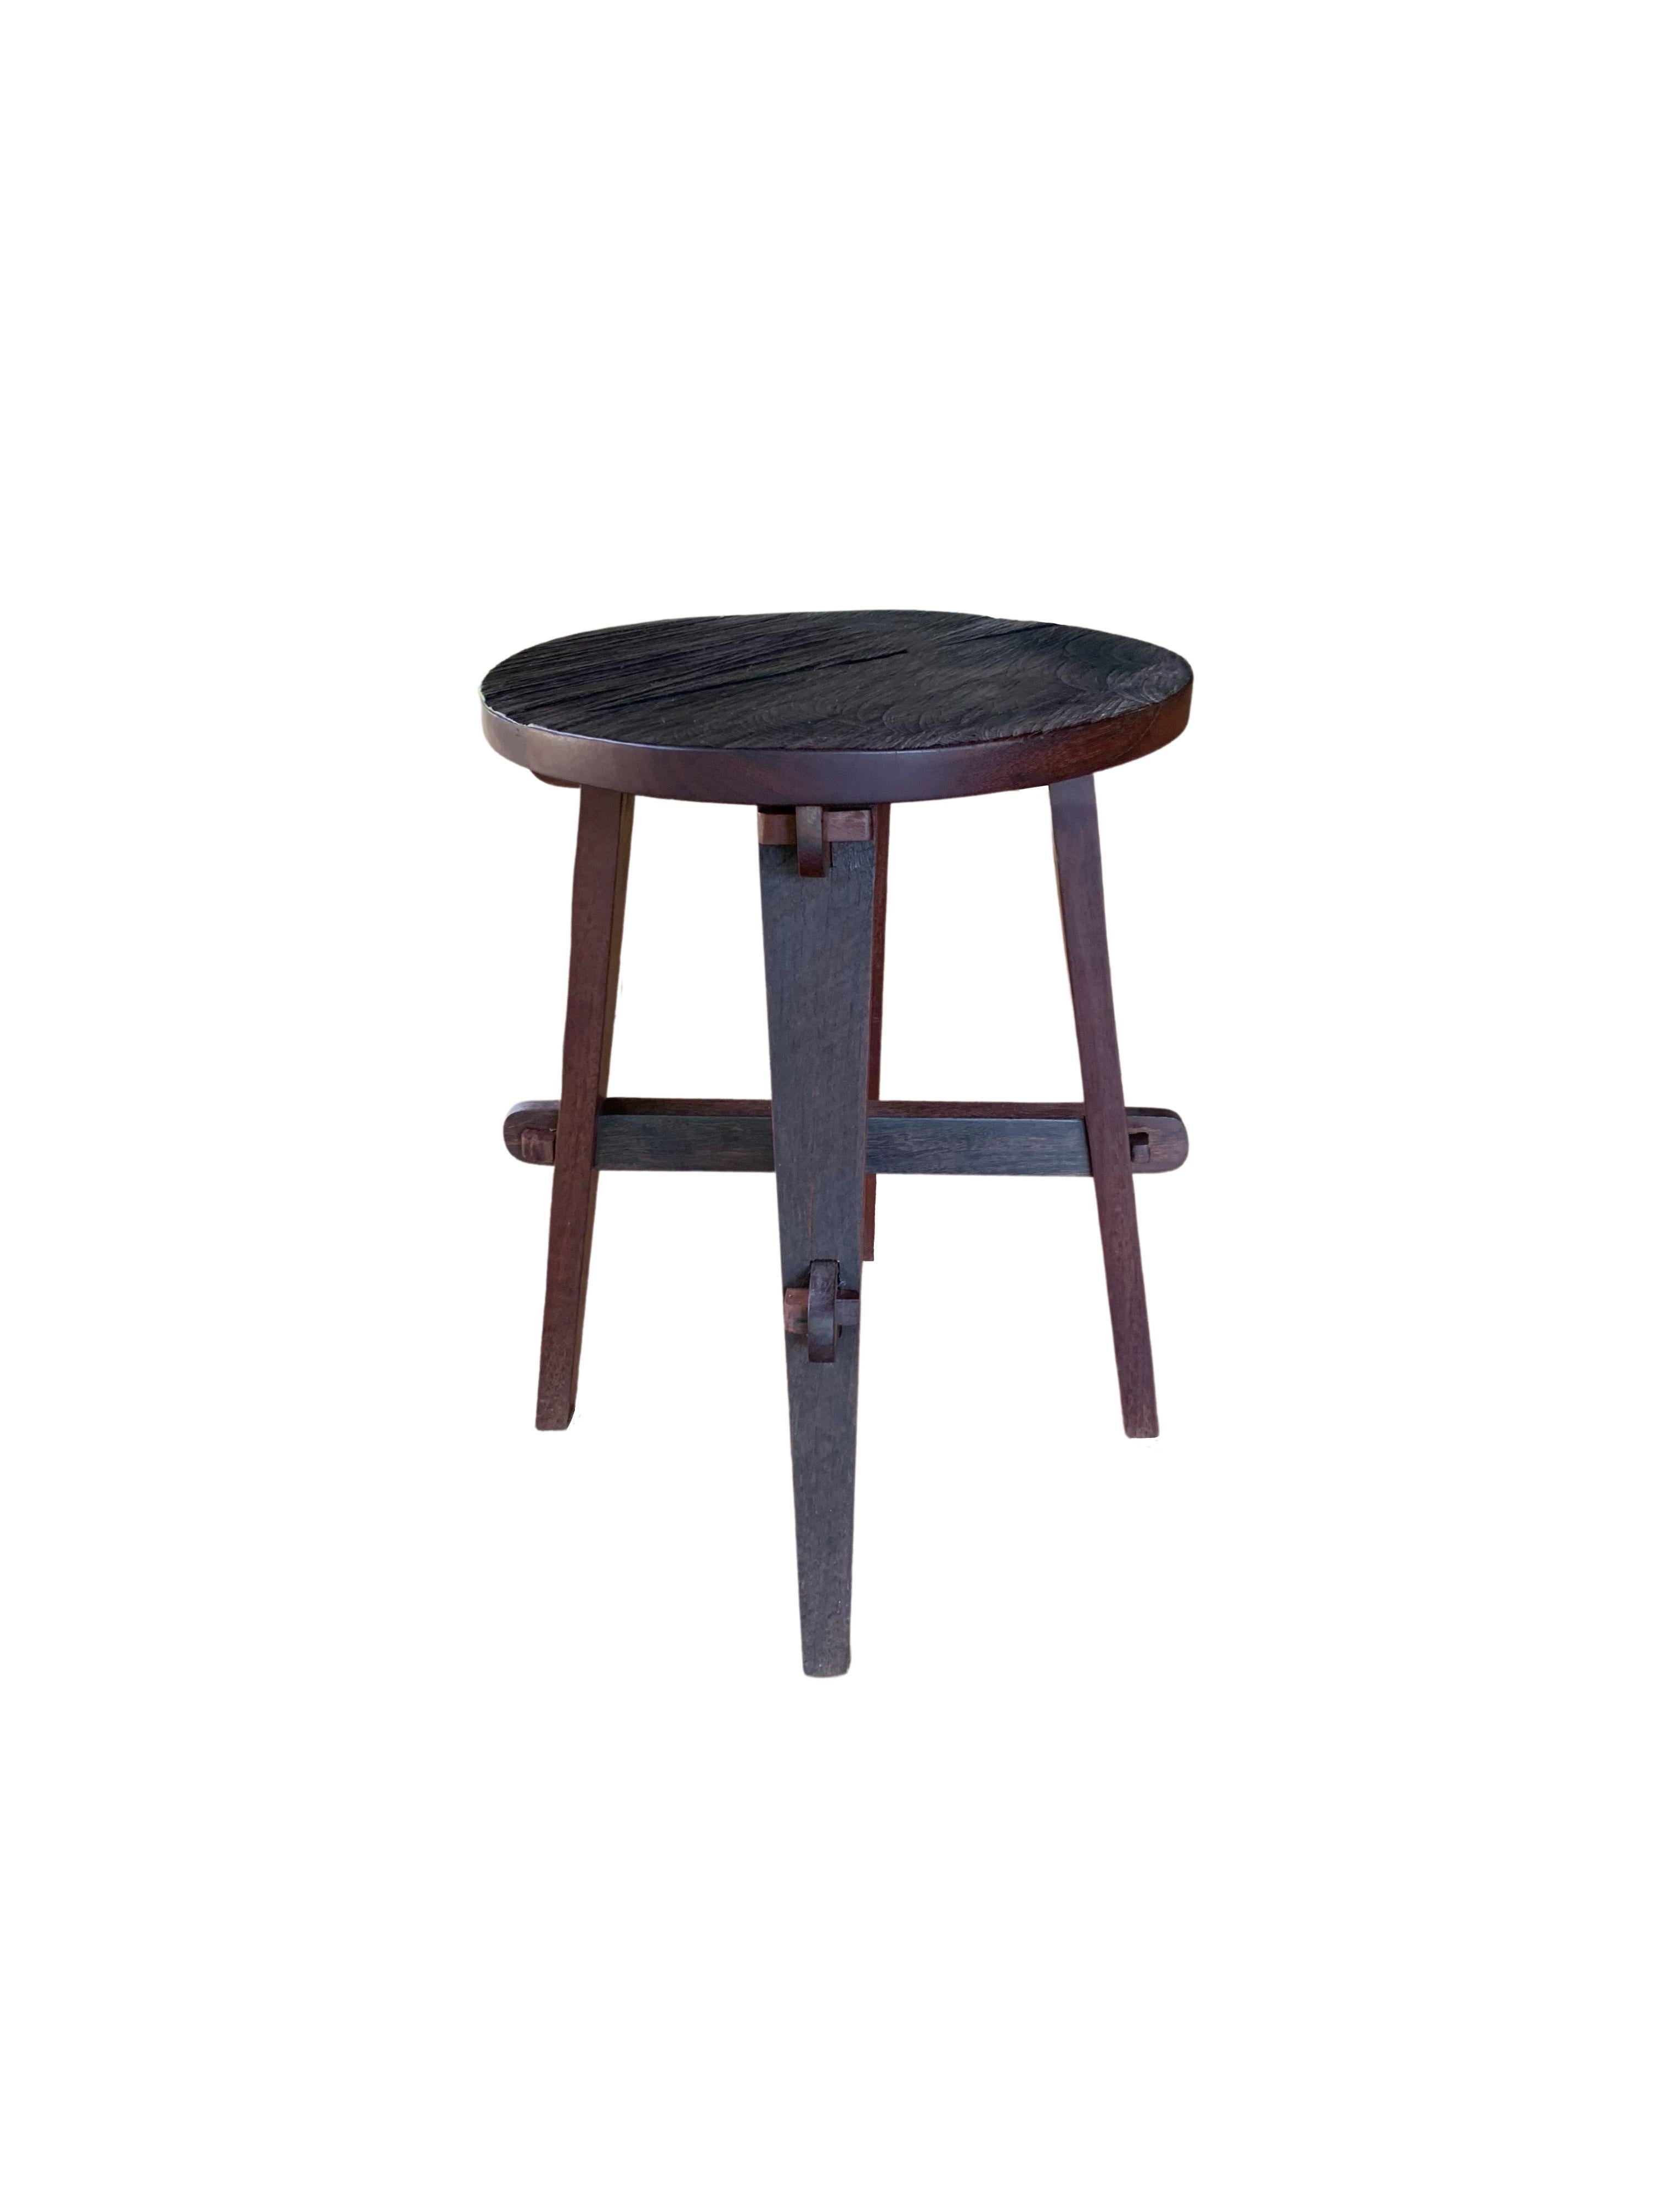 Organic Modern Ironwood Stool Modern Organic, Hand Crafted with Artisanal Wood Joinery For Sale